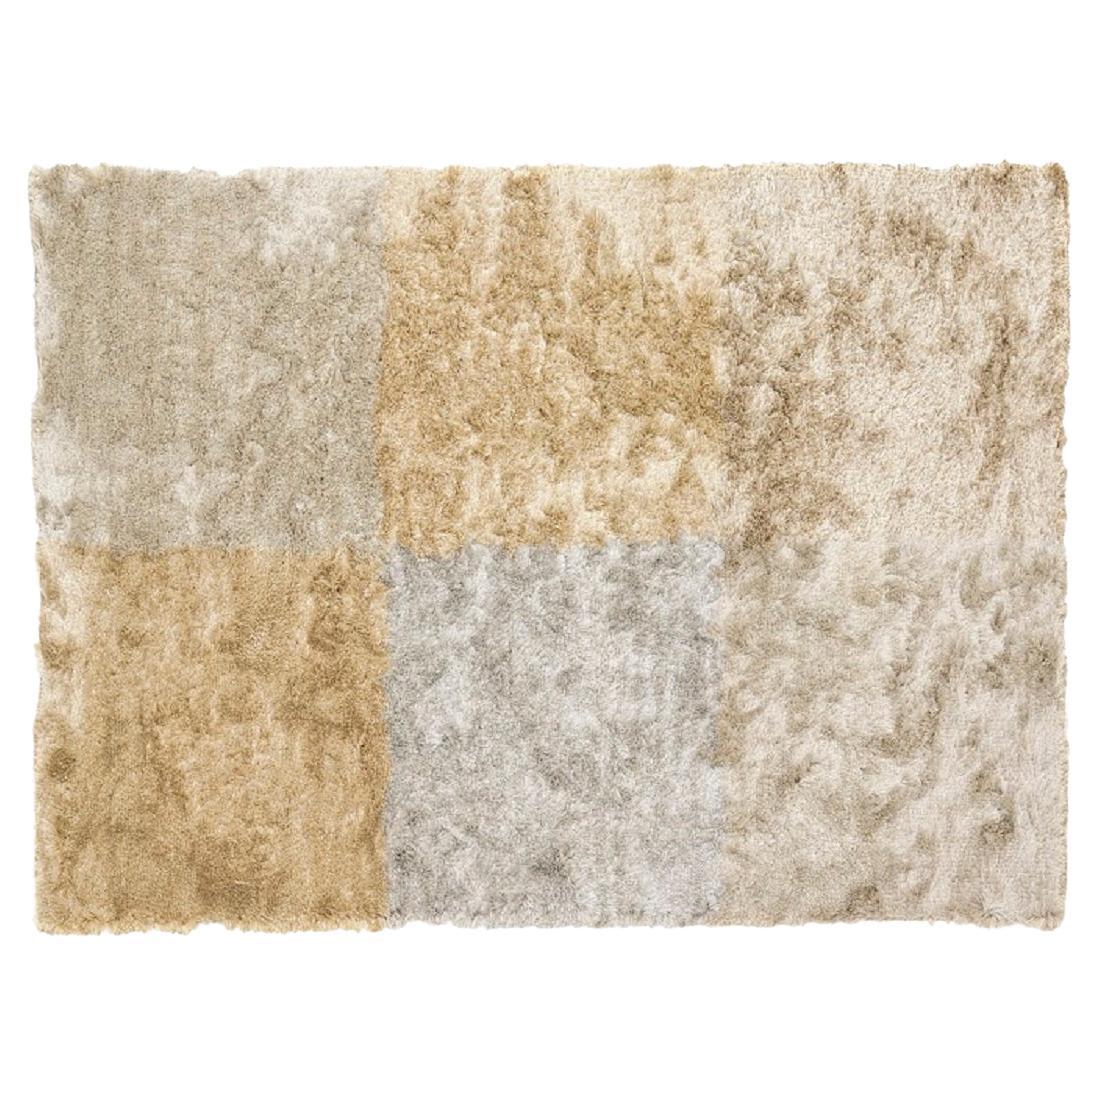 Plumose Rug, Made in Italy